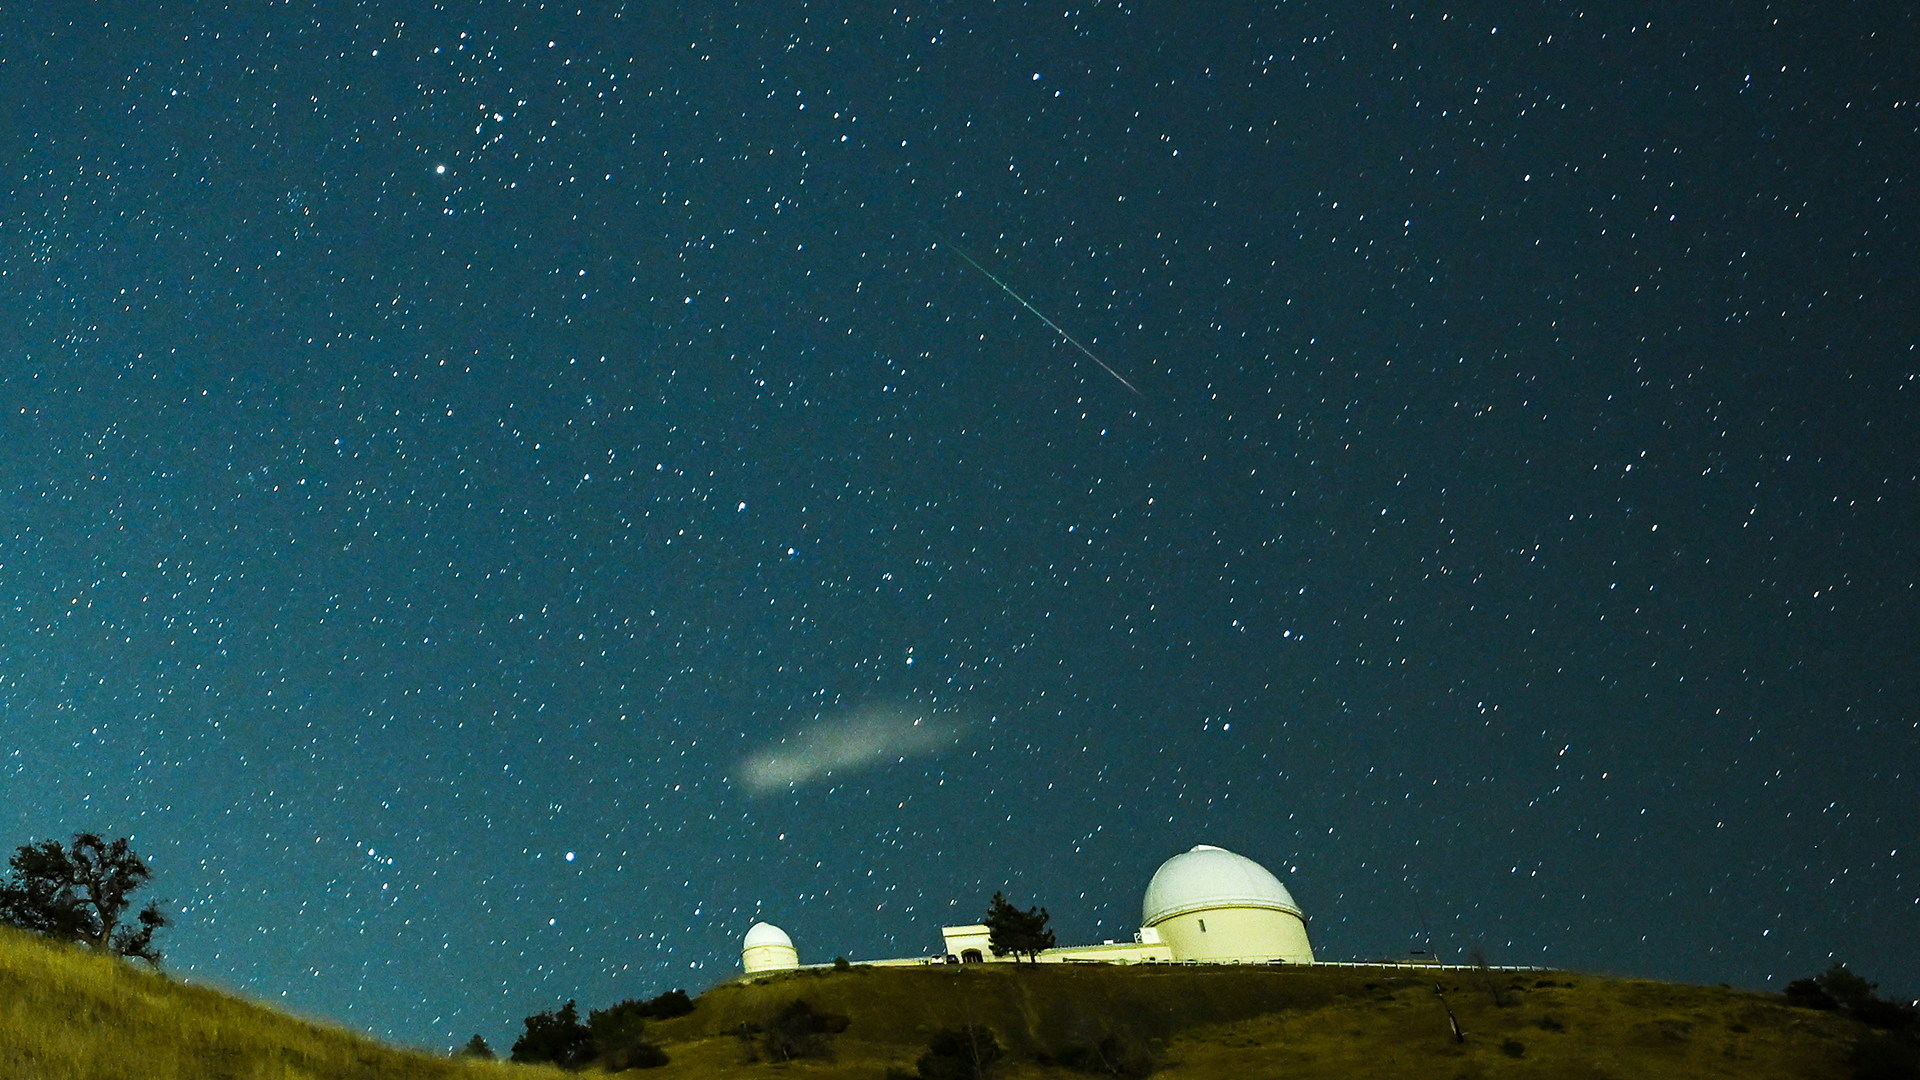 A meteor streaks across the night sky over the Lick Observatory during Perseid meteor shower.